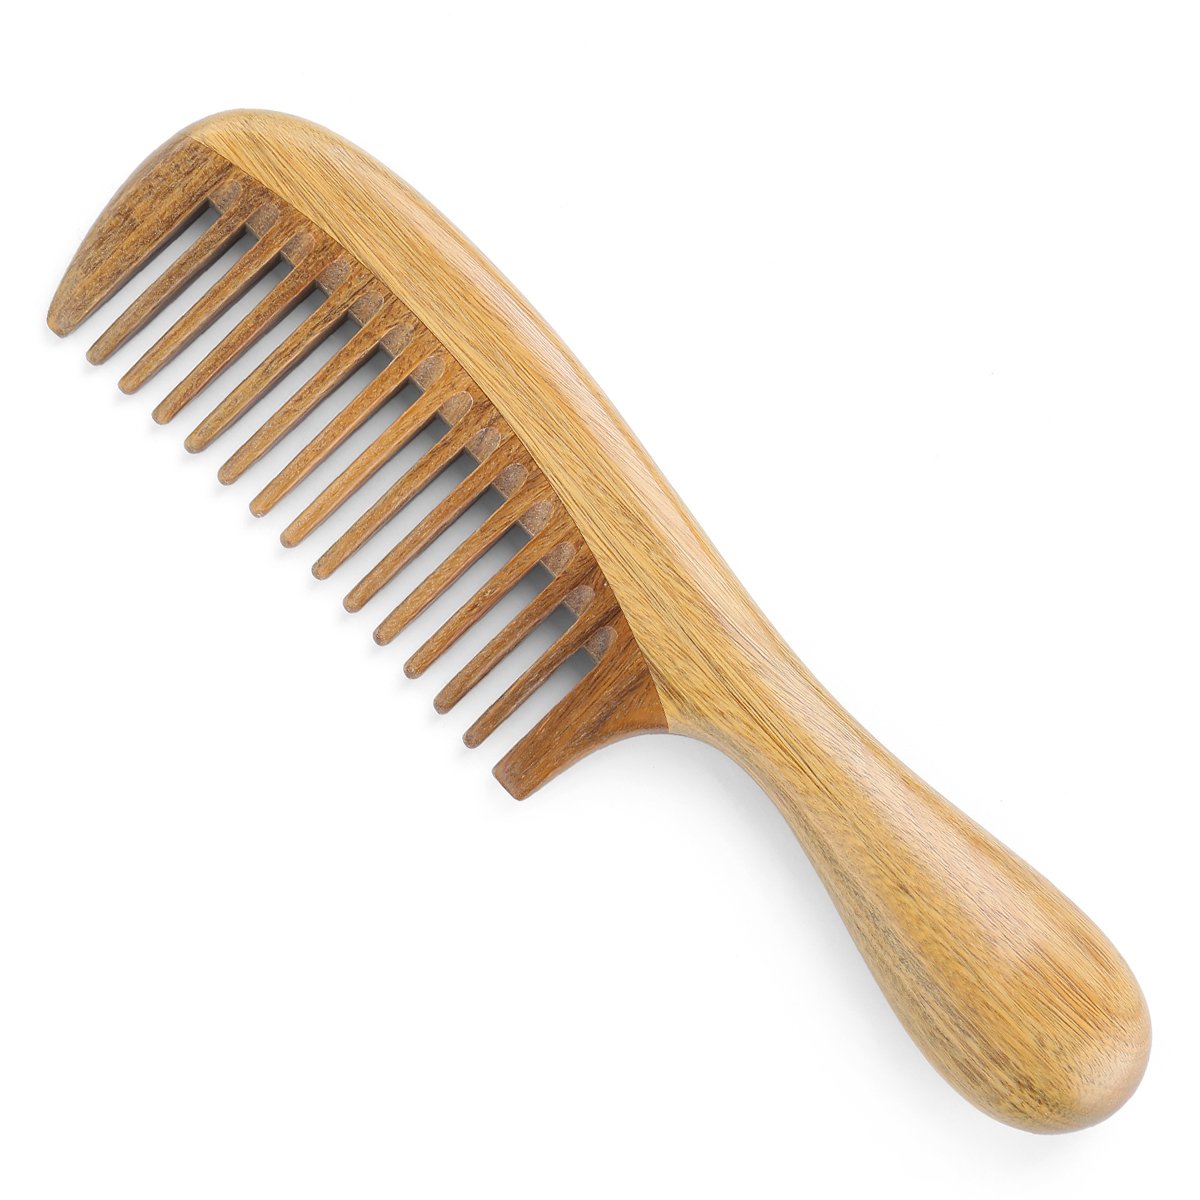 Wide Toothed Sandlewood Hair Comb w/ Handle